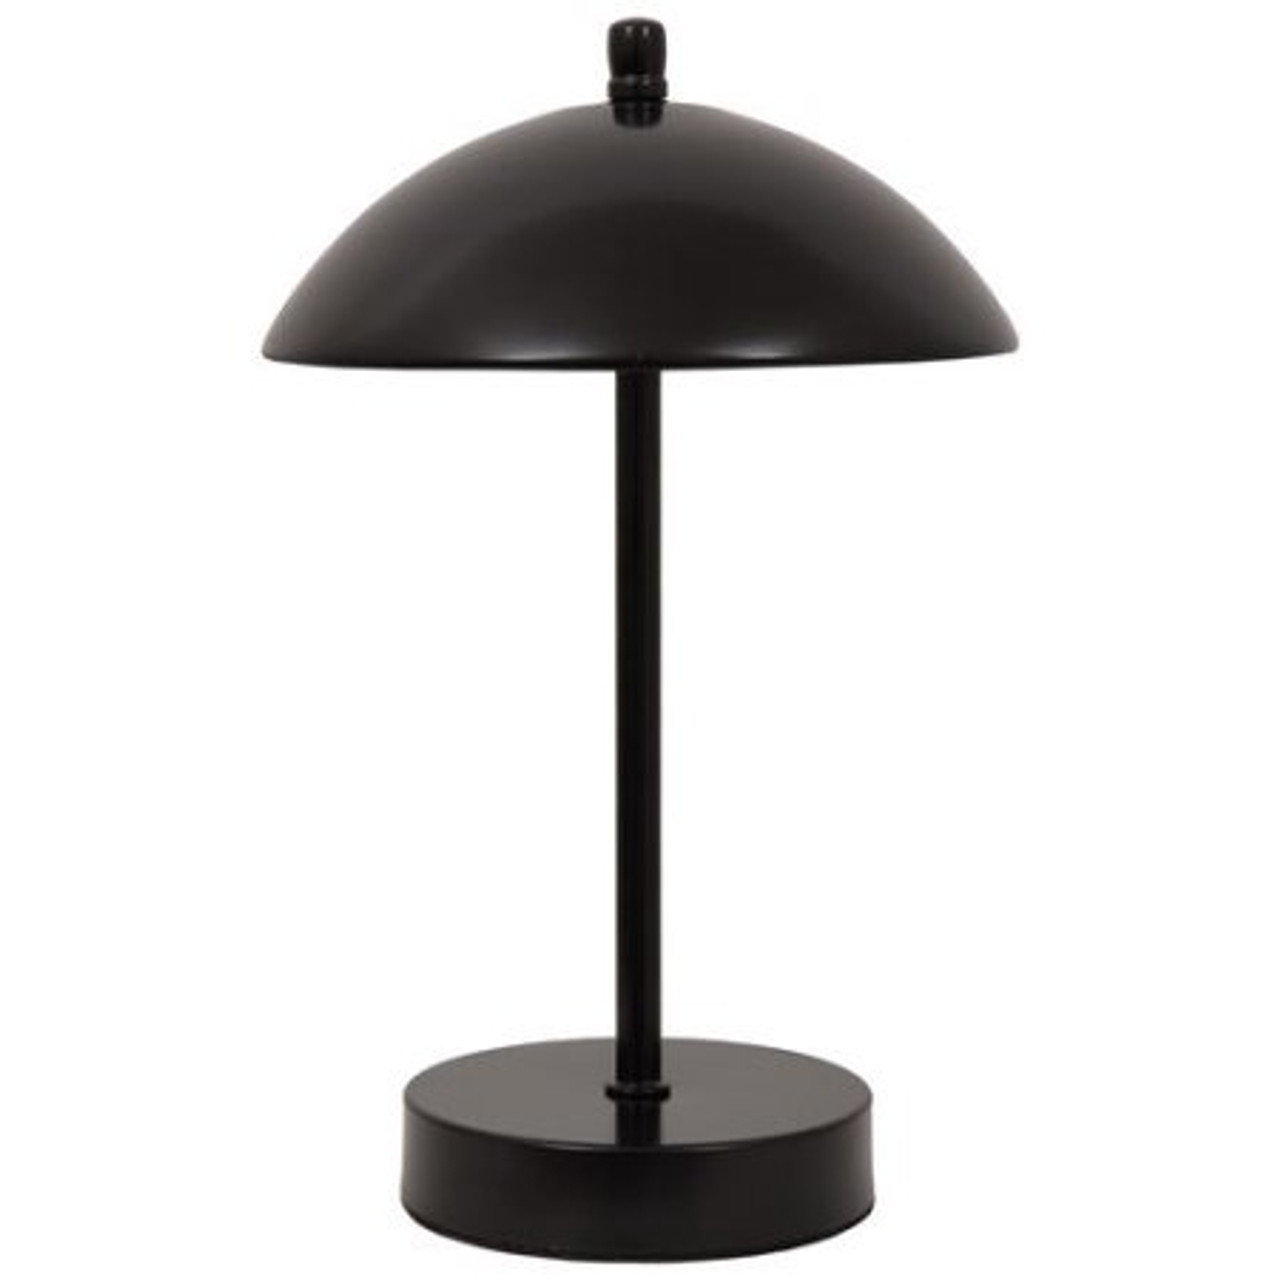 Table Touch Lamp Hidden Camera 